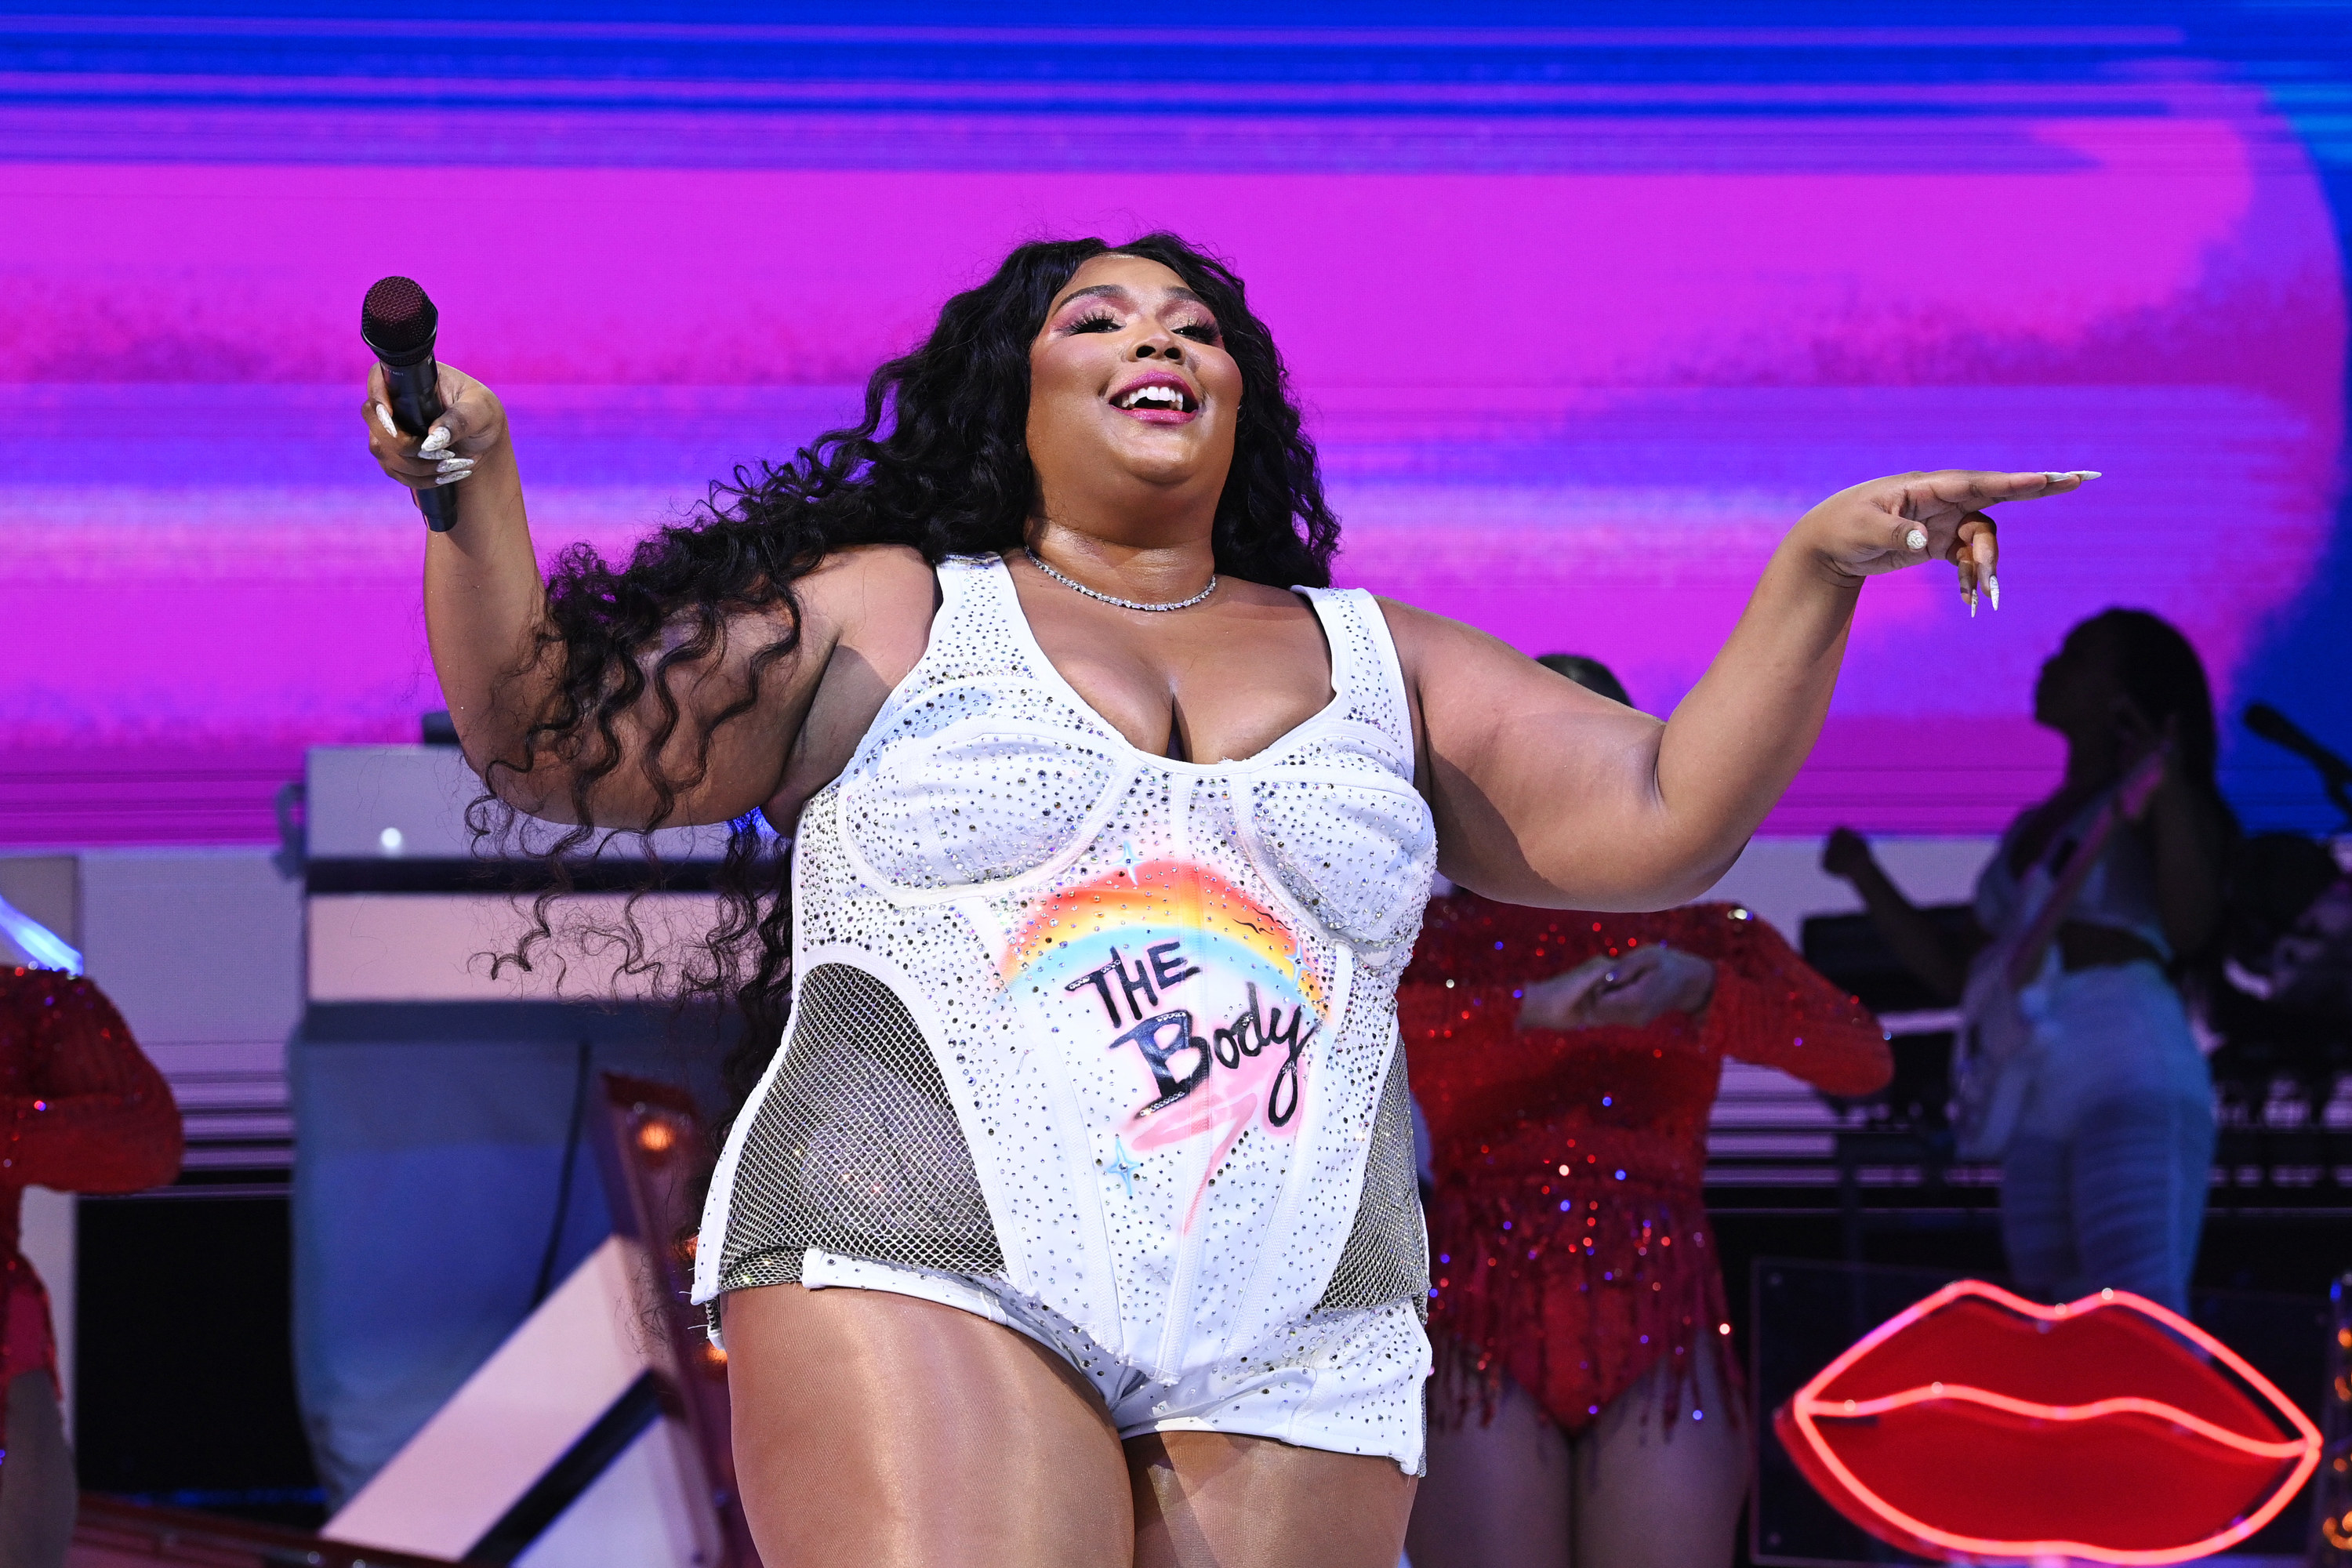 Lizzo puts her microphone out towards the audience